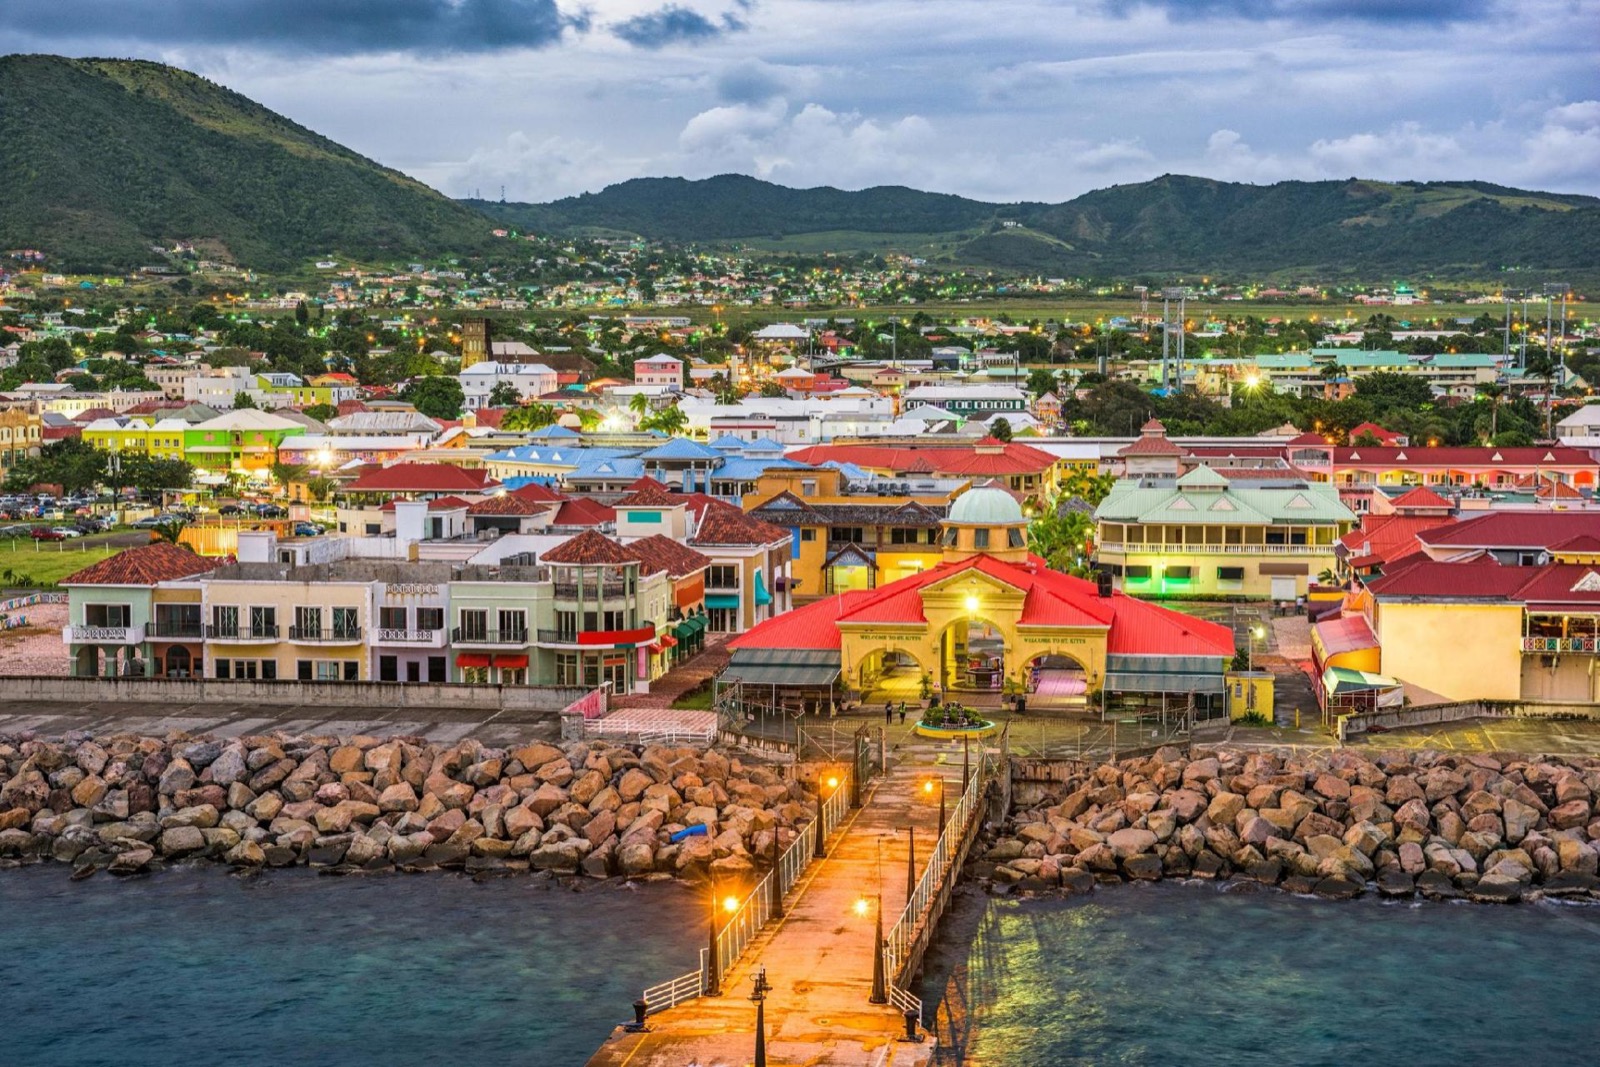 It’s That Easy — Match These 30 Countries to the Continents They’re in to Win Saint Kitts And Nevis